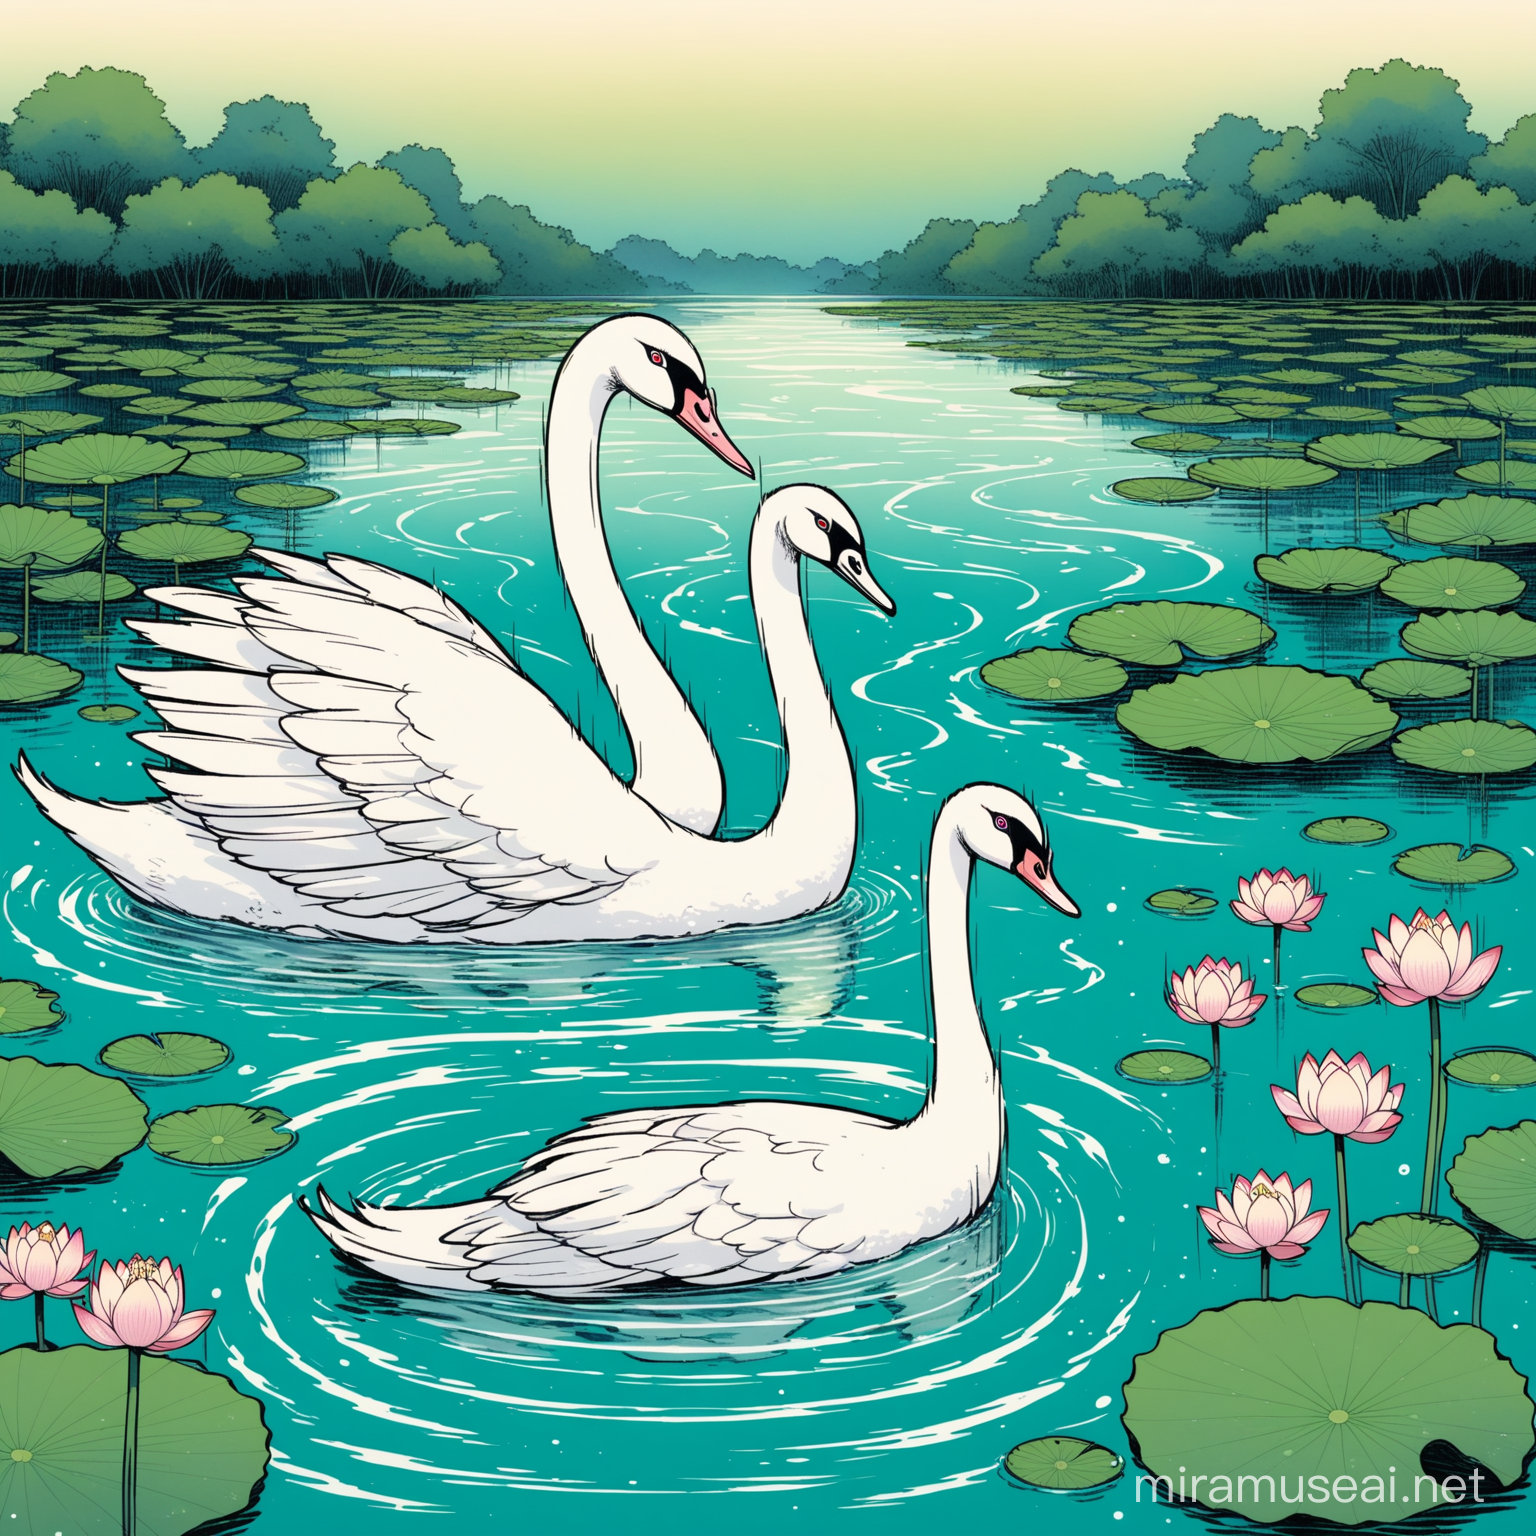 Lotus on pond water. A swan with a crane head and peackock head joined to the swan. Junji ito style,